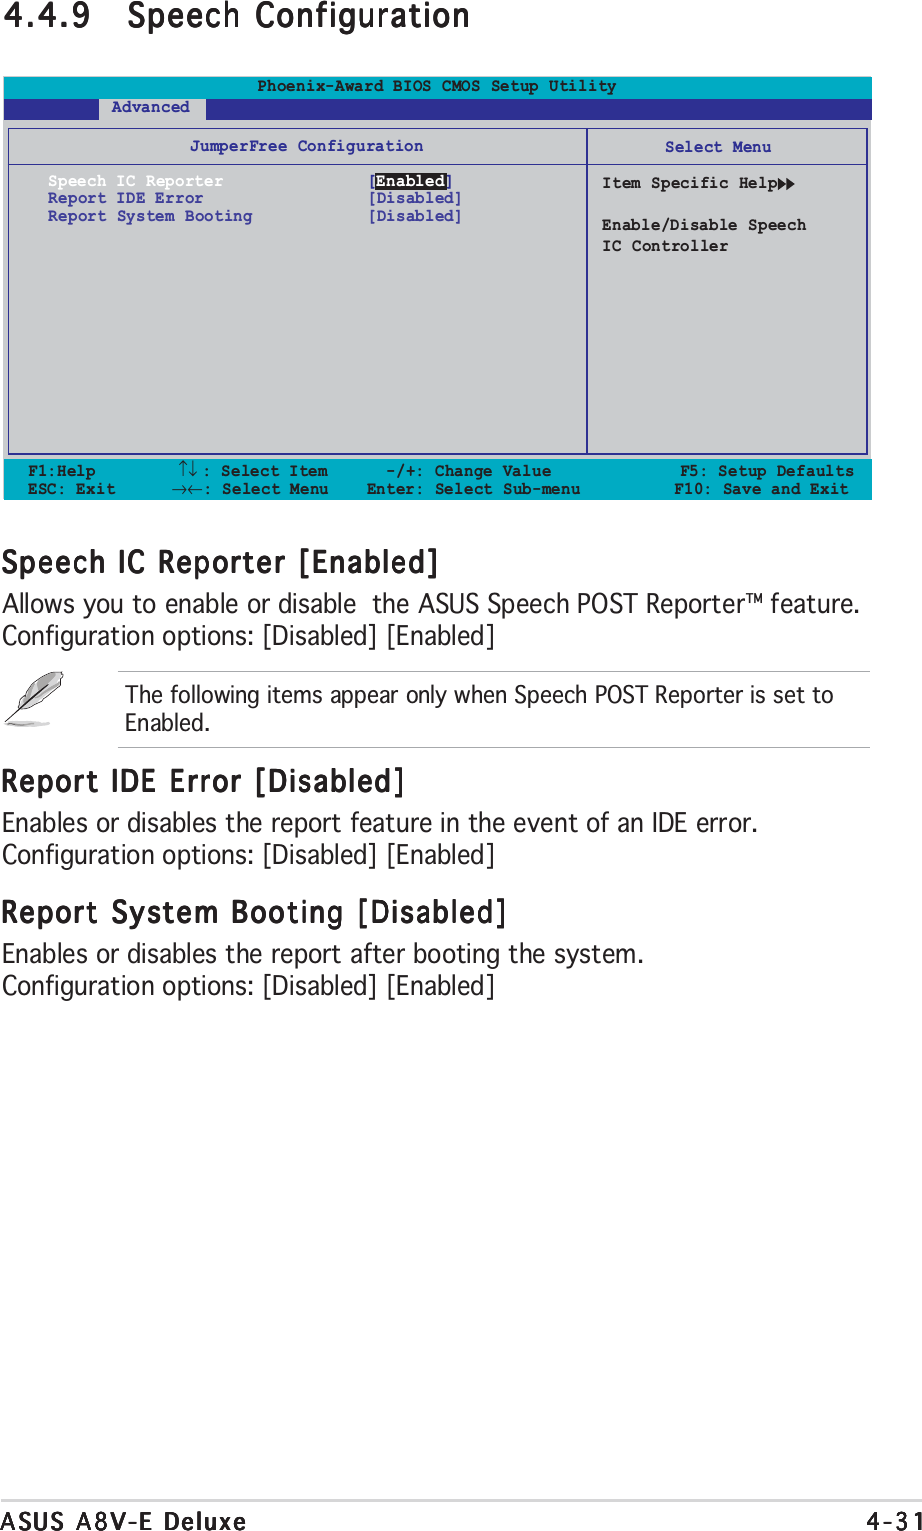 ASUS A8V-E DeluxeASUS A8V-E DeluxeASUS A8V-E DeluxeASUS A8V-E DeluxeASUS A8V-E Deluxe 4-314-314-314-314-31Speech IC Reporter [Enabled]Speech IC Reporter [Enabled]Speech IC Reporter [Enabled]Speech IC Reporter [Enabled]Speech IC Reporter [Enabled]Allows you to enable or disable  the ASUS Speech POST Reporter™ feature.Configuration options: [Disabled] [Enabled]The following items appear only when Speech POST Reporter is set toEnabled.Report IDE Error [Disabled]Report IDE Error [Disabled]Report IDE Error [Disabled]Report IDE Error [Disabled]Report IDE Error [Disabled]Enables or disables the report feature in the event of an IDE error.Configuration options: [Disabled] [Enabled]Report System Booting [Disabled]Report System Booting [Disabled]Report System Booting [Disabled]Report System Booting [Disabled]Report System Booting [Disabled]Enables or disables the report after booting the system.Configuration options: [Disabled] [Enabled]4.4.94.4.94.4.94.4.94.4.9 Speech ConfigurationSpeech ConfigurationSpeech ConfigurationSpeech ConfigurationSpeech ConfigurationF1:Help         ↑↓ : Select Item   -/+: Change Value           F5: Setup DefaultsESC: Exit        →←: Select Menu Enter: Select Sub-menu  F10: Save and ExitSelect MenuItem Specific HelpEnable/Disable SpeechIC ControllerJumperFree ConfigurationSpeech IC Reporter [Enabled]Report IDE Error [Disabled]Report System Booting [Disabled]Phoenix-Award BIOS CMOS Setup Utility       Advanced